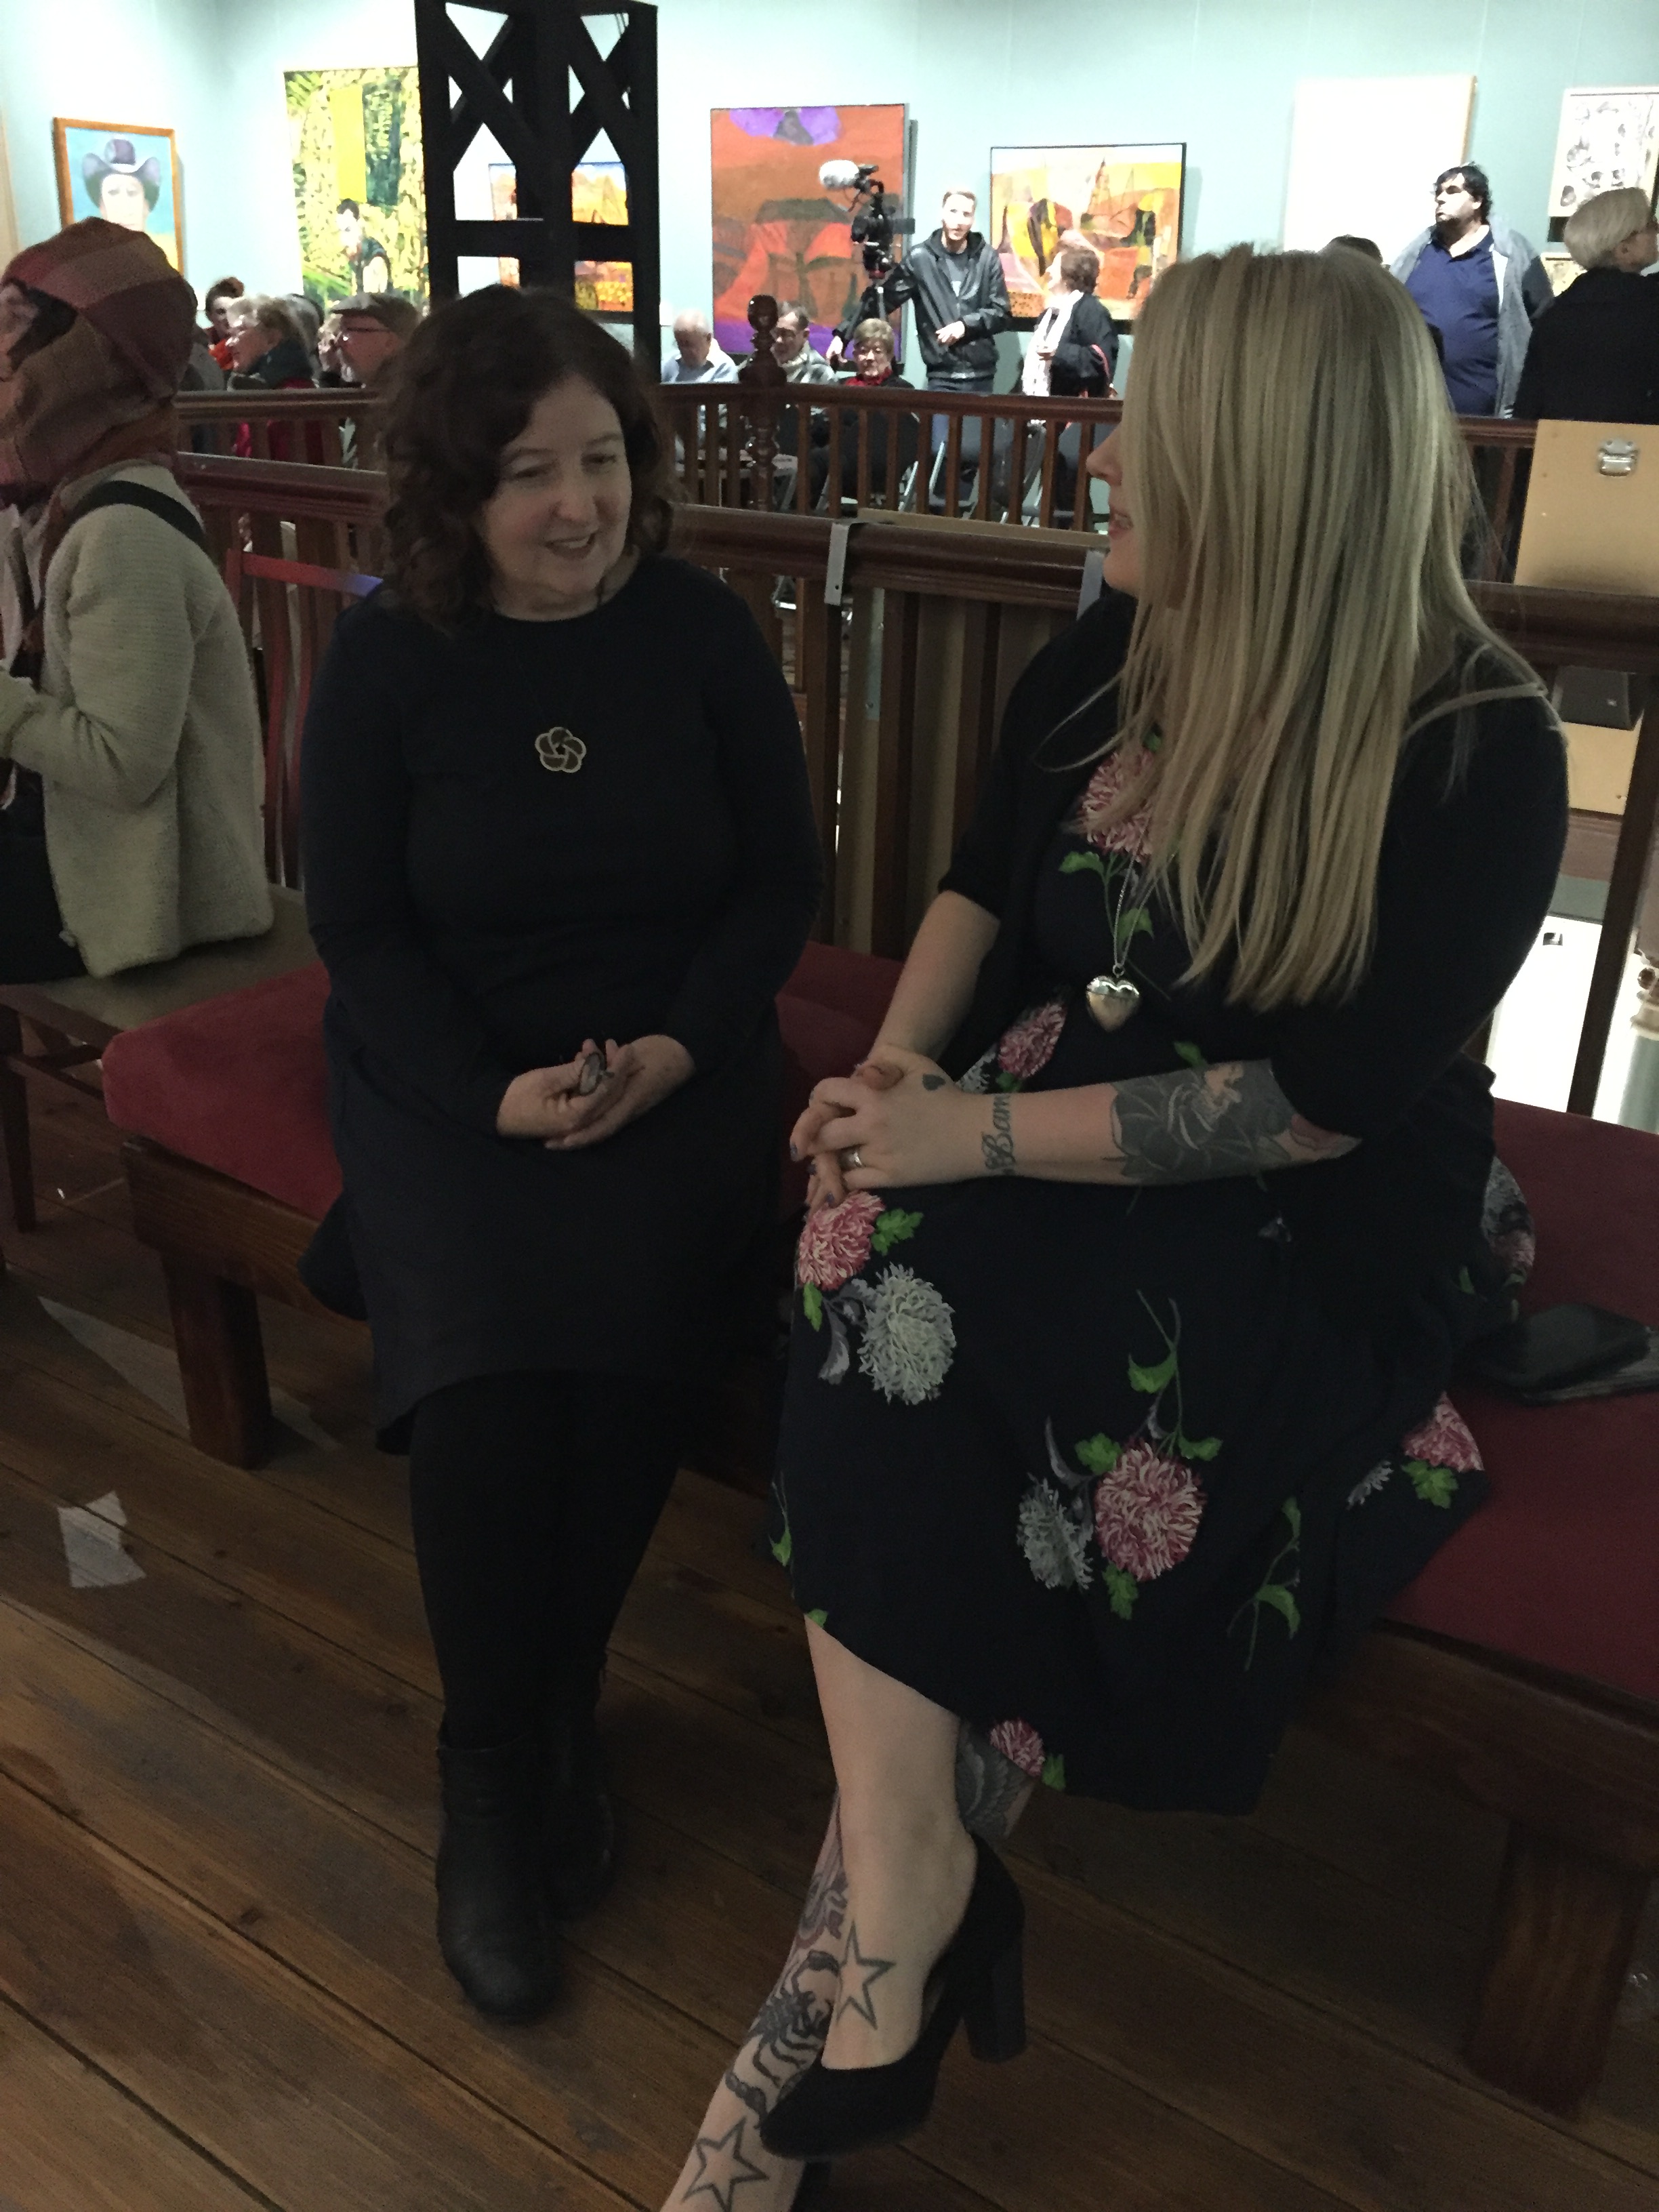 Cushla Hill, Senior Paintings Conservator Grimwade Centre and Tara Callaghan, Gallery and Museum Manager BHRAG at Vae Victis  Unveiling  event